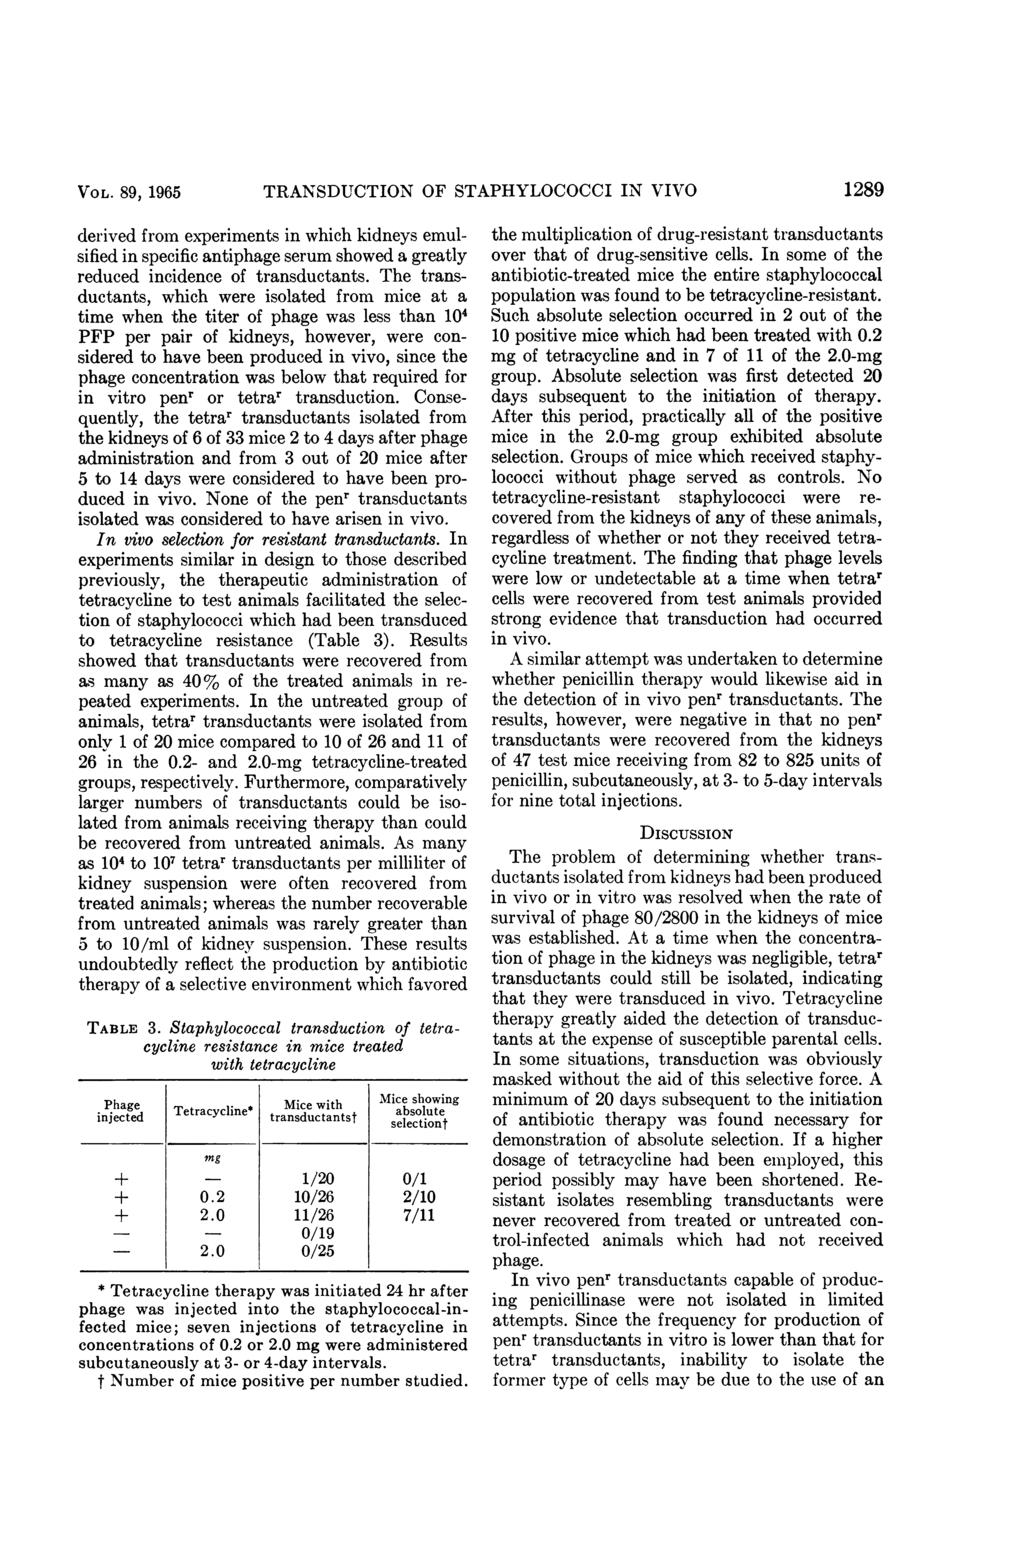 VO L. 89, 1965 TRANSDUCTION OF STAPHYLOCOCCI IN VIVO derived from experiments in which kidneys emulsified in specific antiphage serum showed a greatly reduced incidence of transductants.